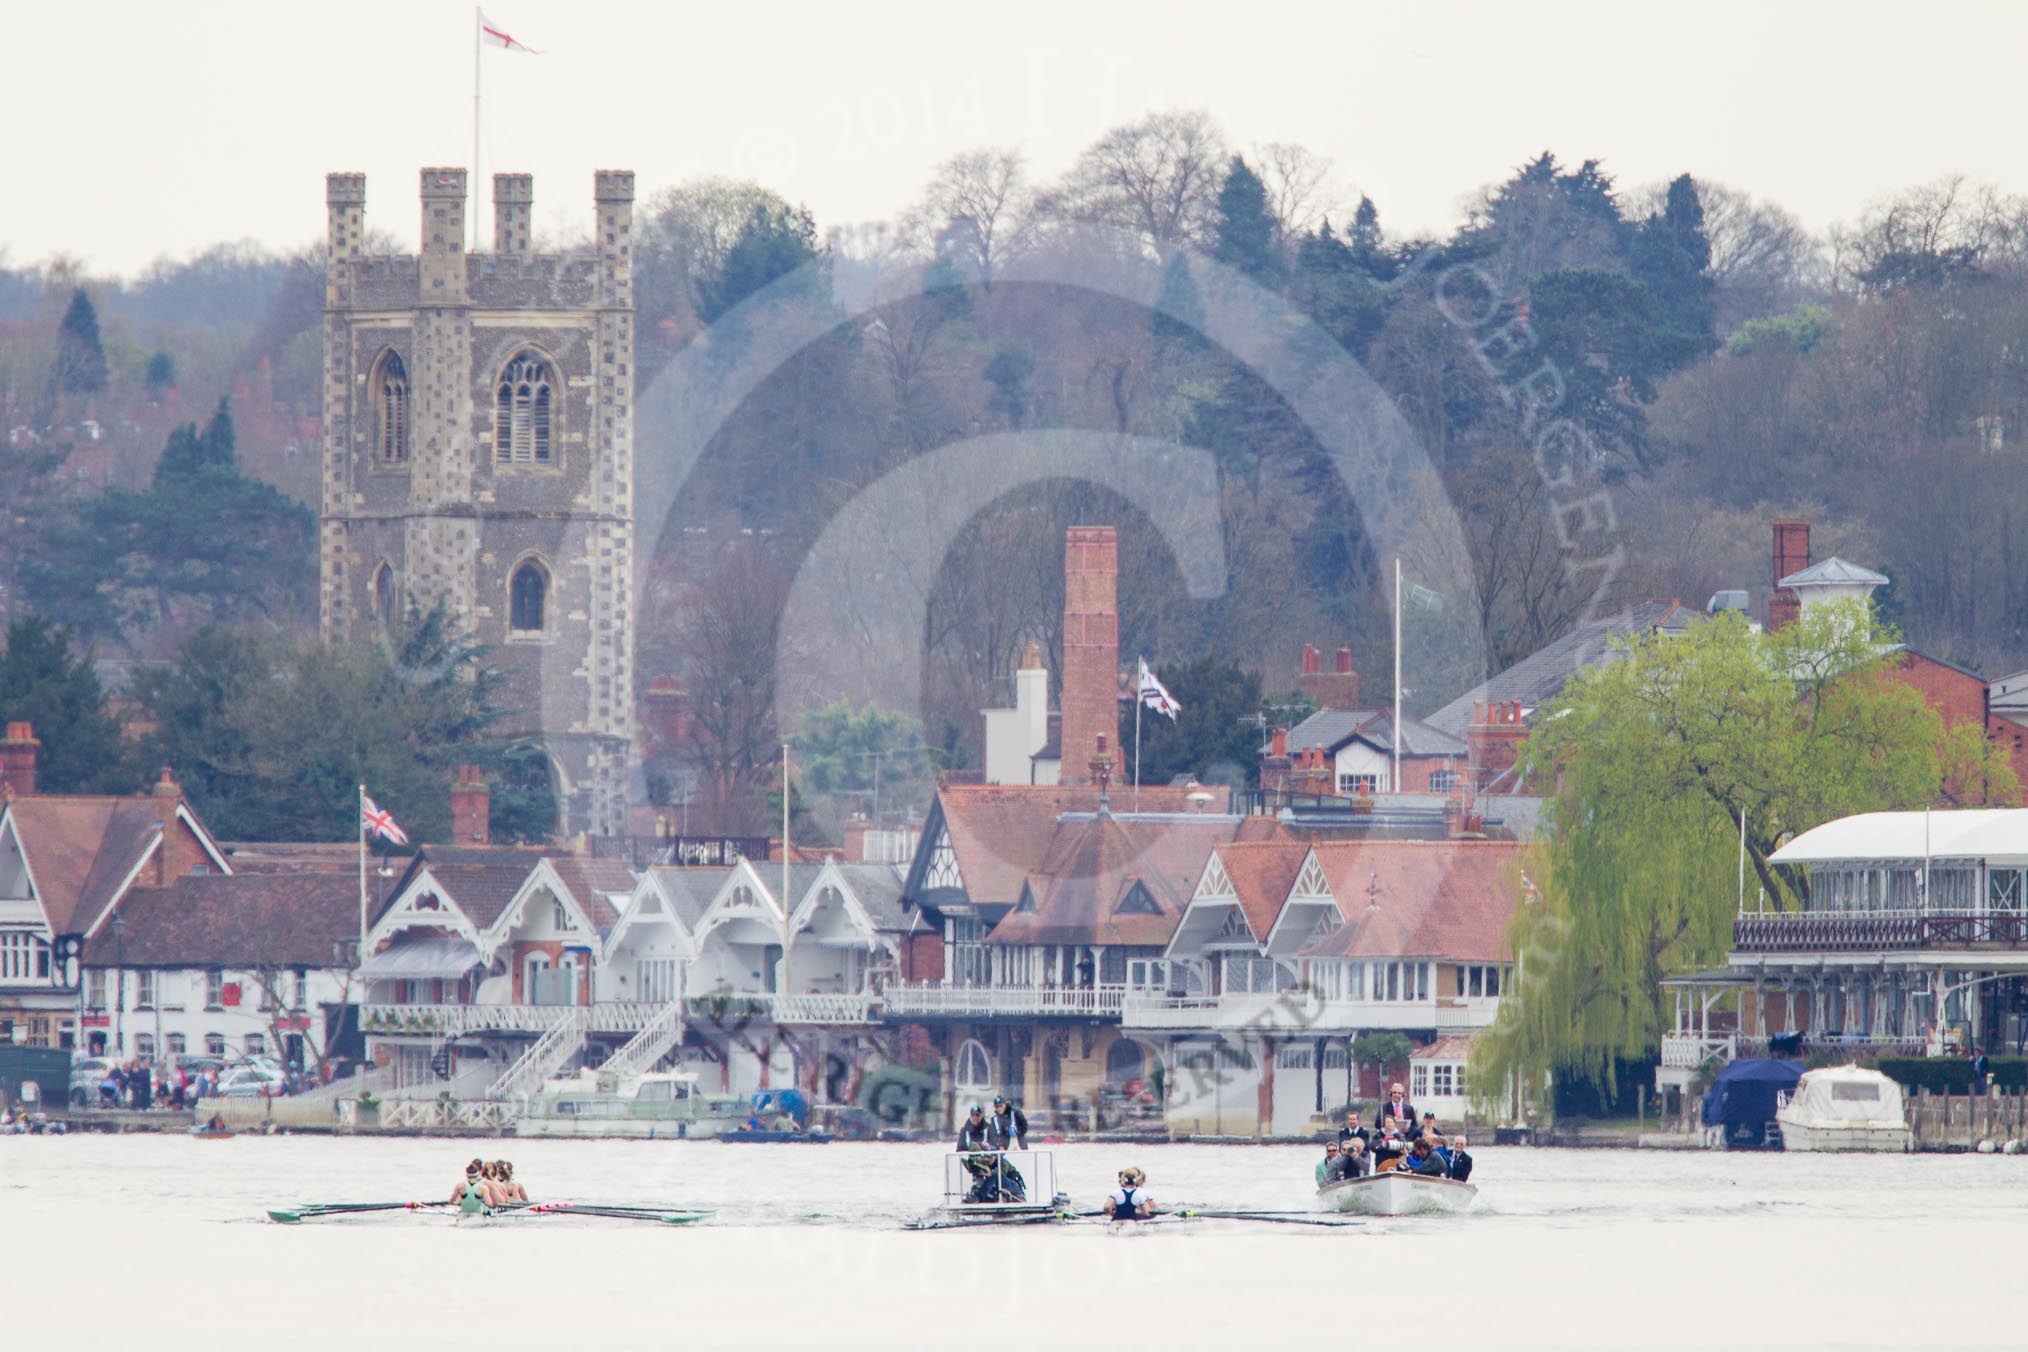 The Women's Boat Race and Henley Boat Races 2014: The start of the Newton Women's Boat Race at Henley. Oxford is on the right (Bucks) side, following the boats is the umpire's launch and, on the right, a press launch..
River Thames,
Henley-on-Thames,
Buckinghamshire,
United Kingdom,
on 30 March 2014 at 15:12, image #281